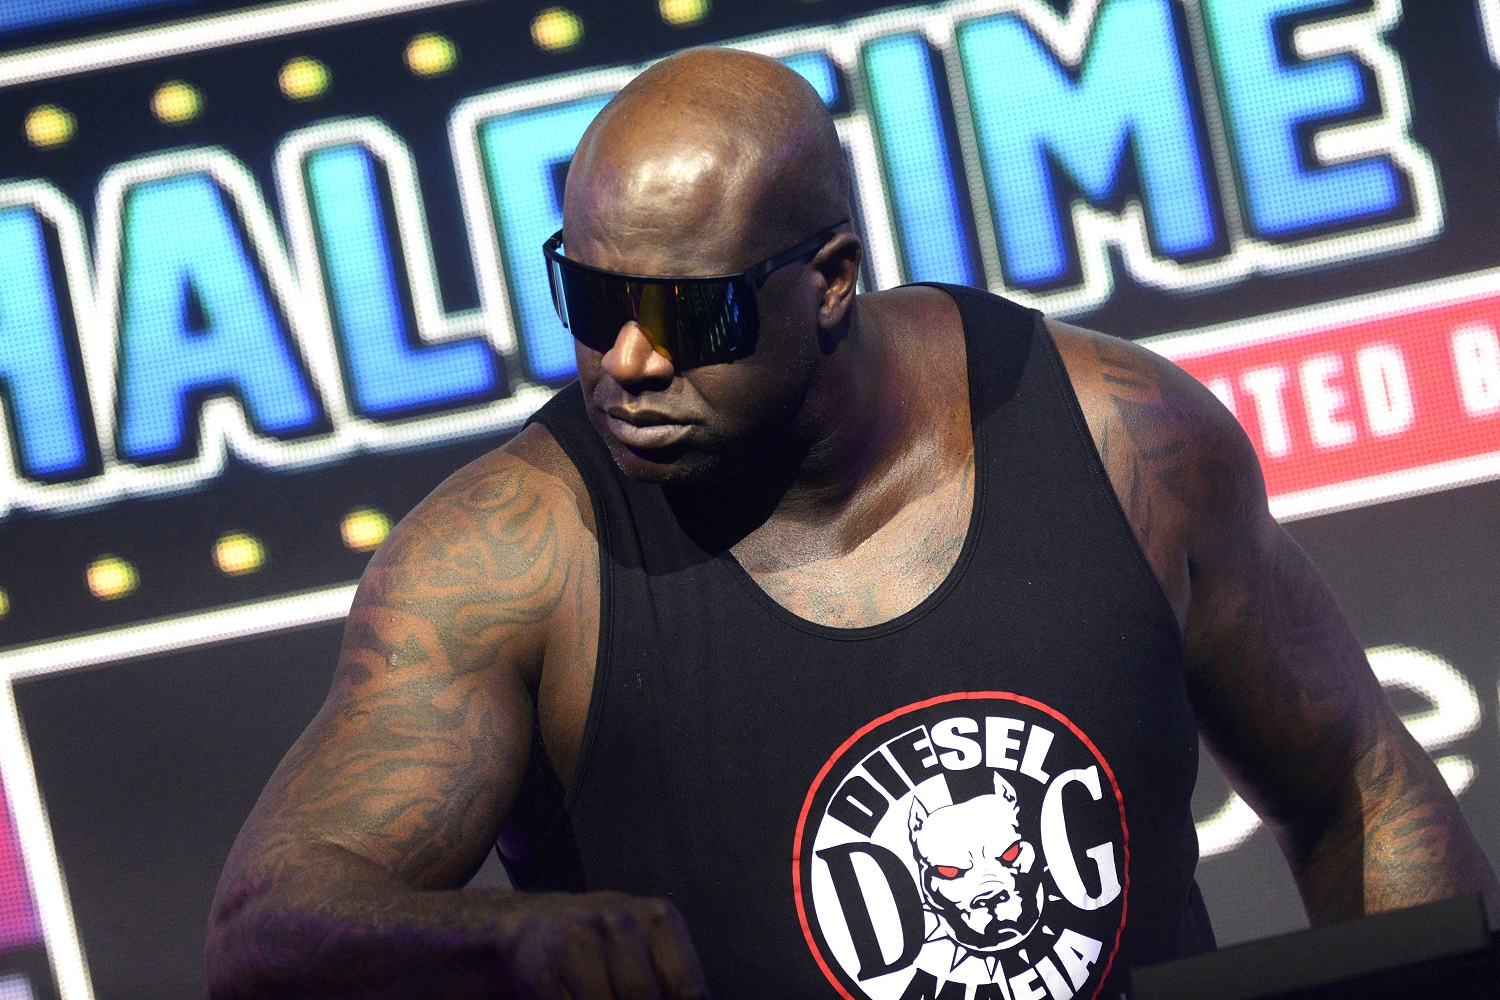 Shaquille O’Neal performs as DJ Diesel at The Shaq Bowl for Super Bowl 55 in Tampa, Florida.